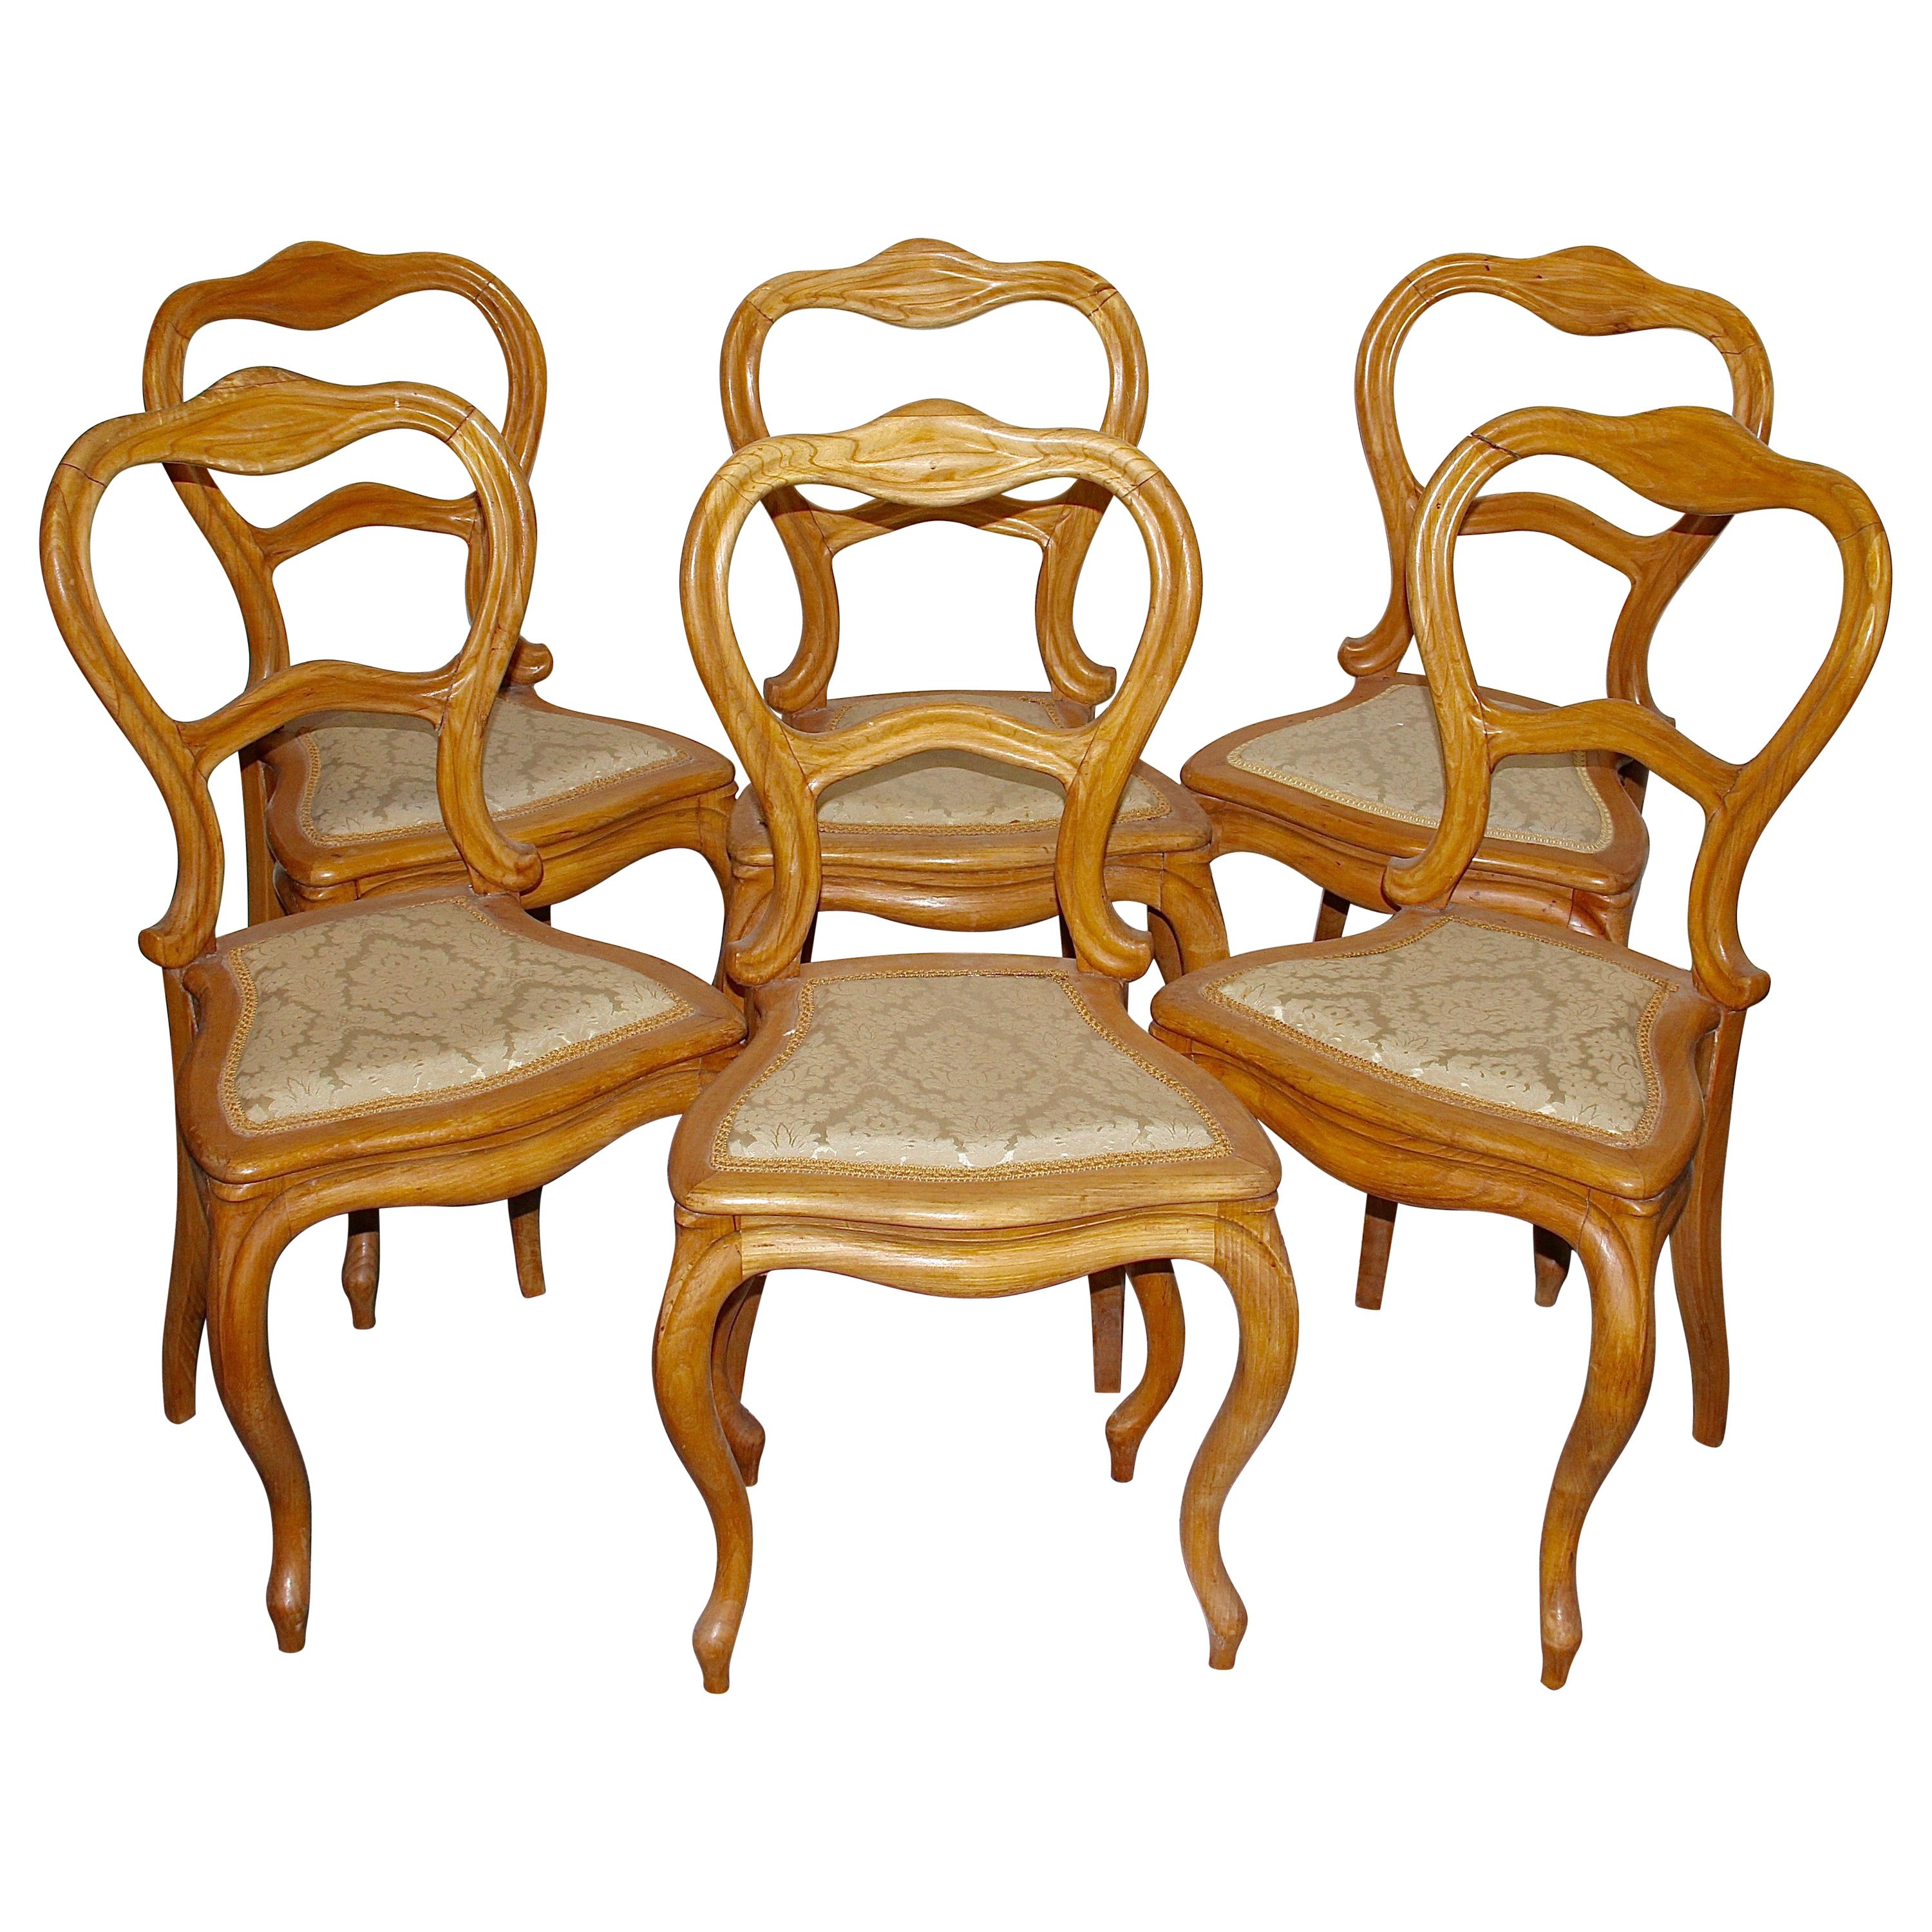 Set of Six Antique Side Chairs, Germany, Early 19th Century For Sale